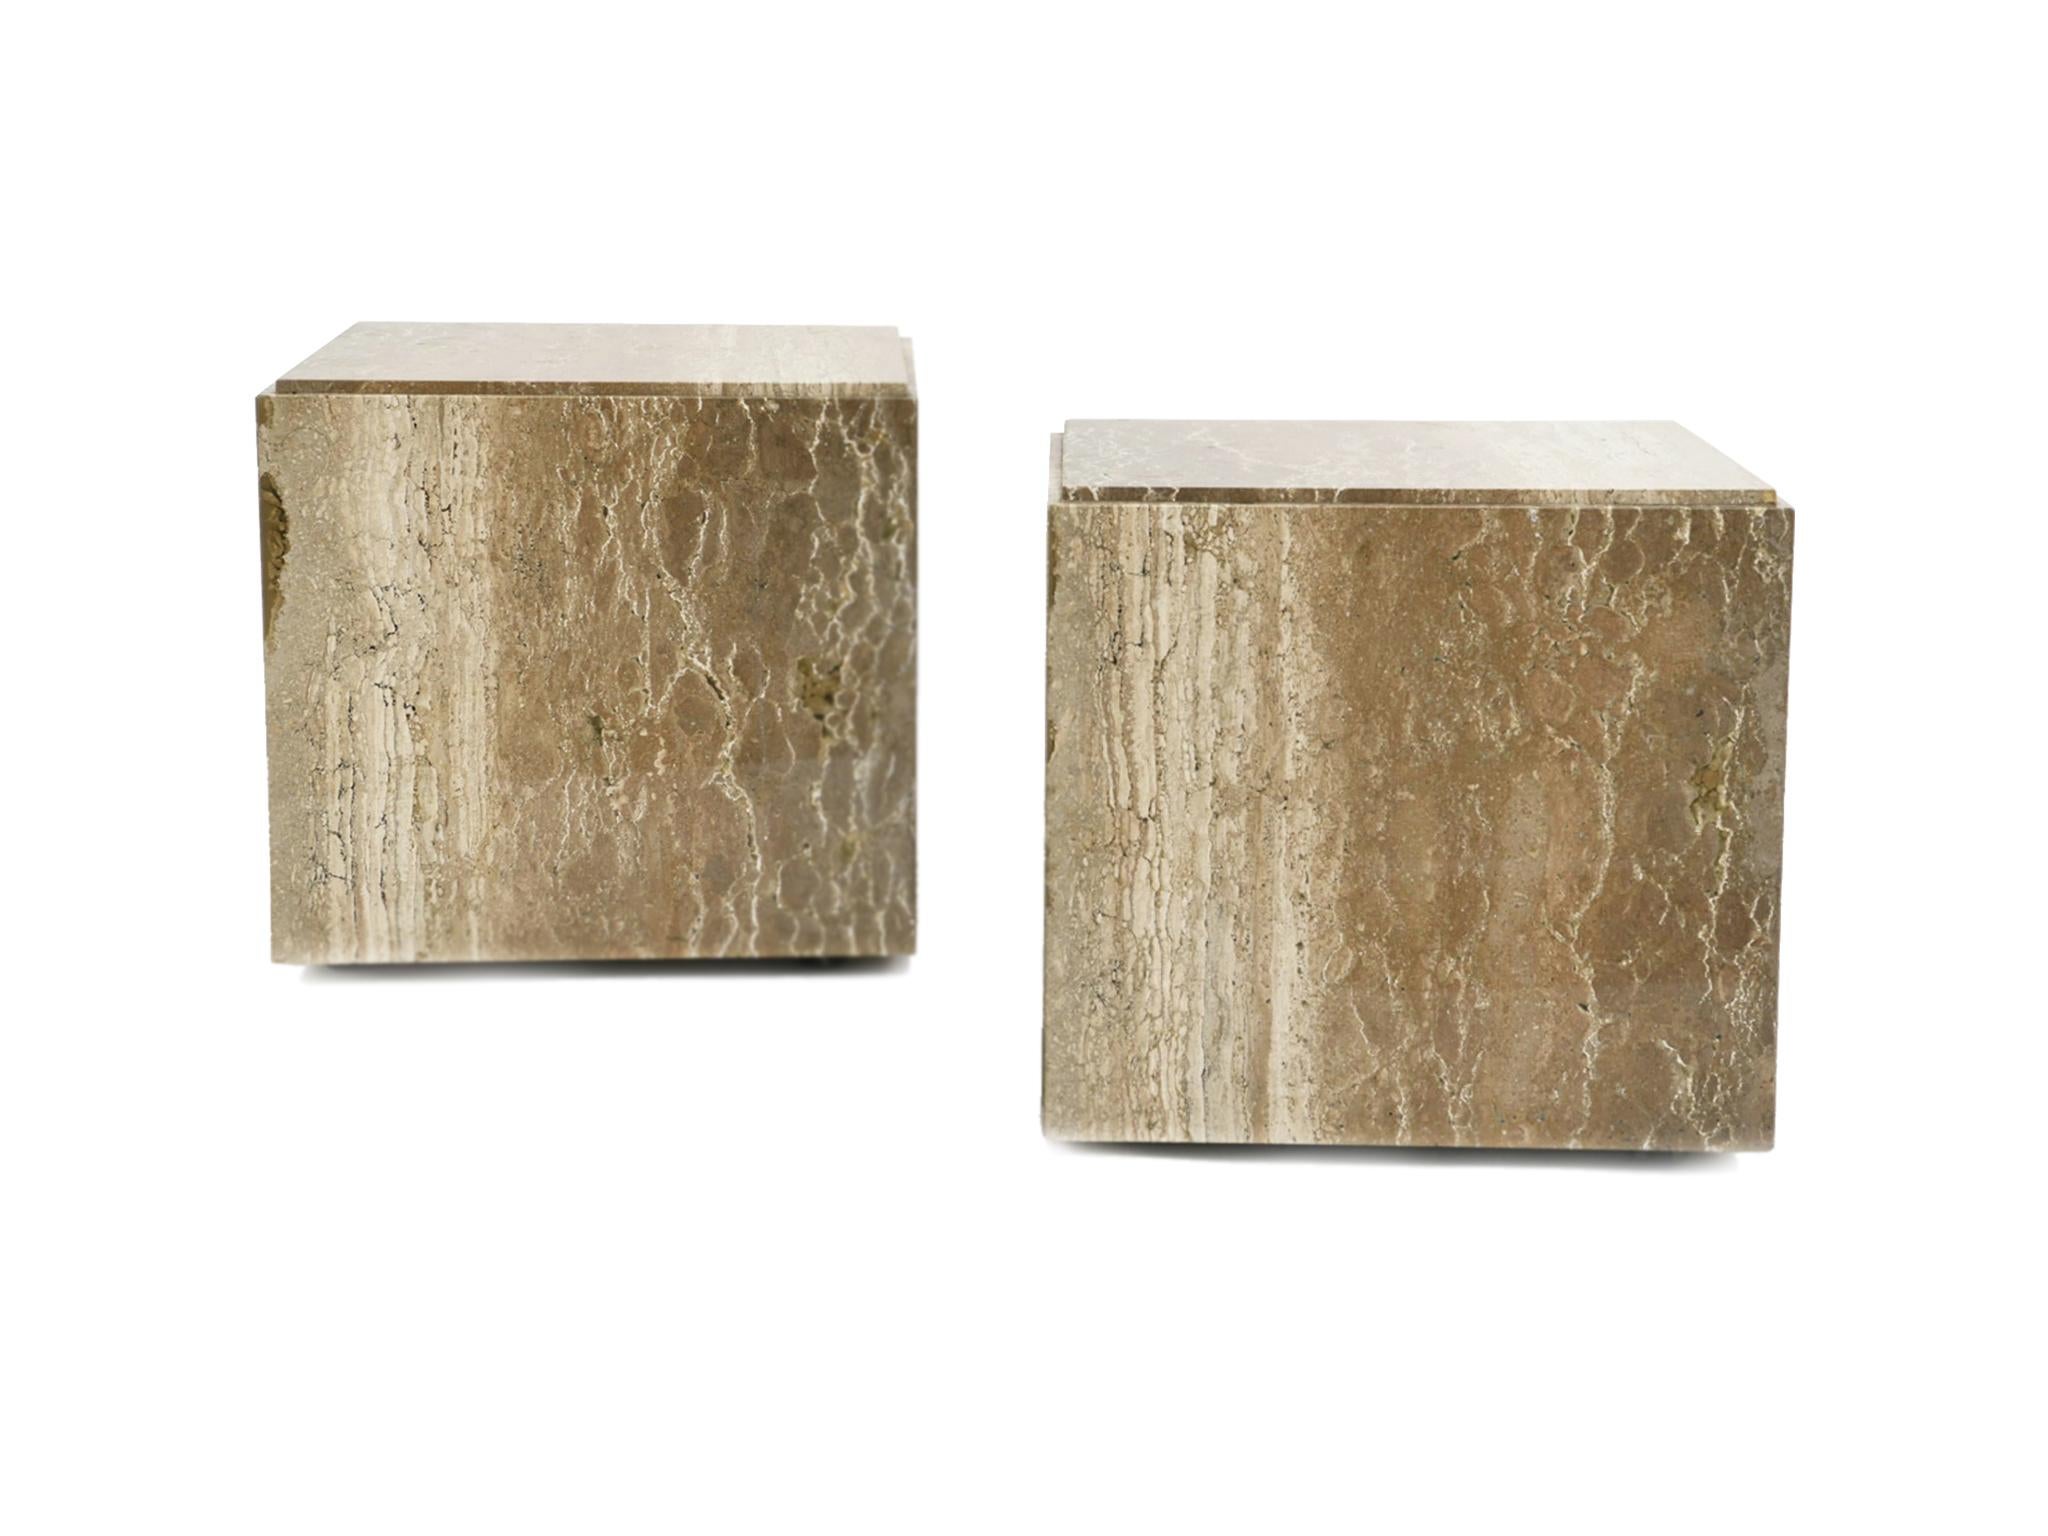 1970s pair of cube side tables comprised of travertine and set on casters. The tables are designed in the style of photographer-designer Willy Rizzo. Like his designs, these tables are geometric forms with smooth, simple lines. We love their